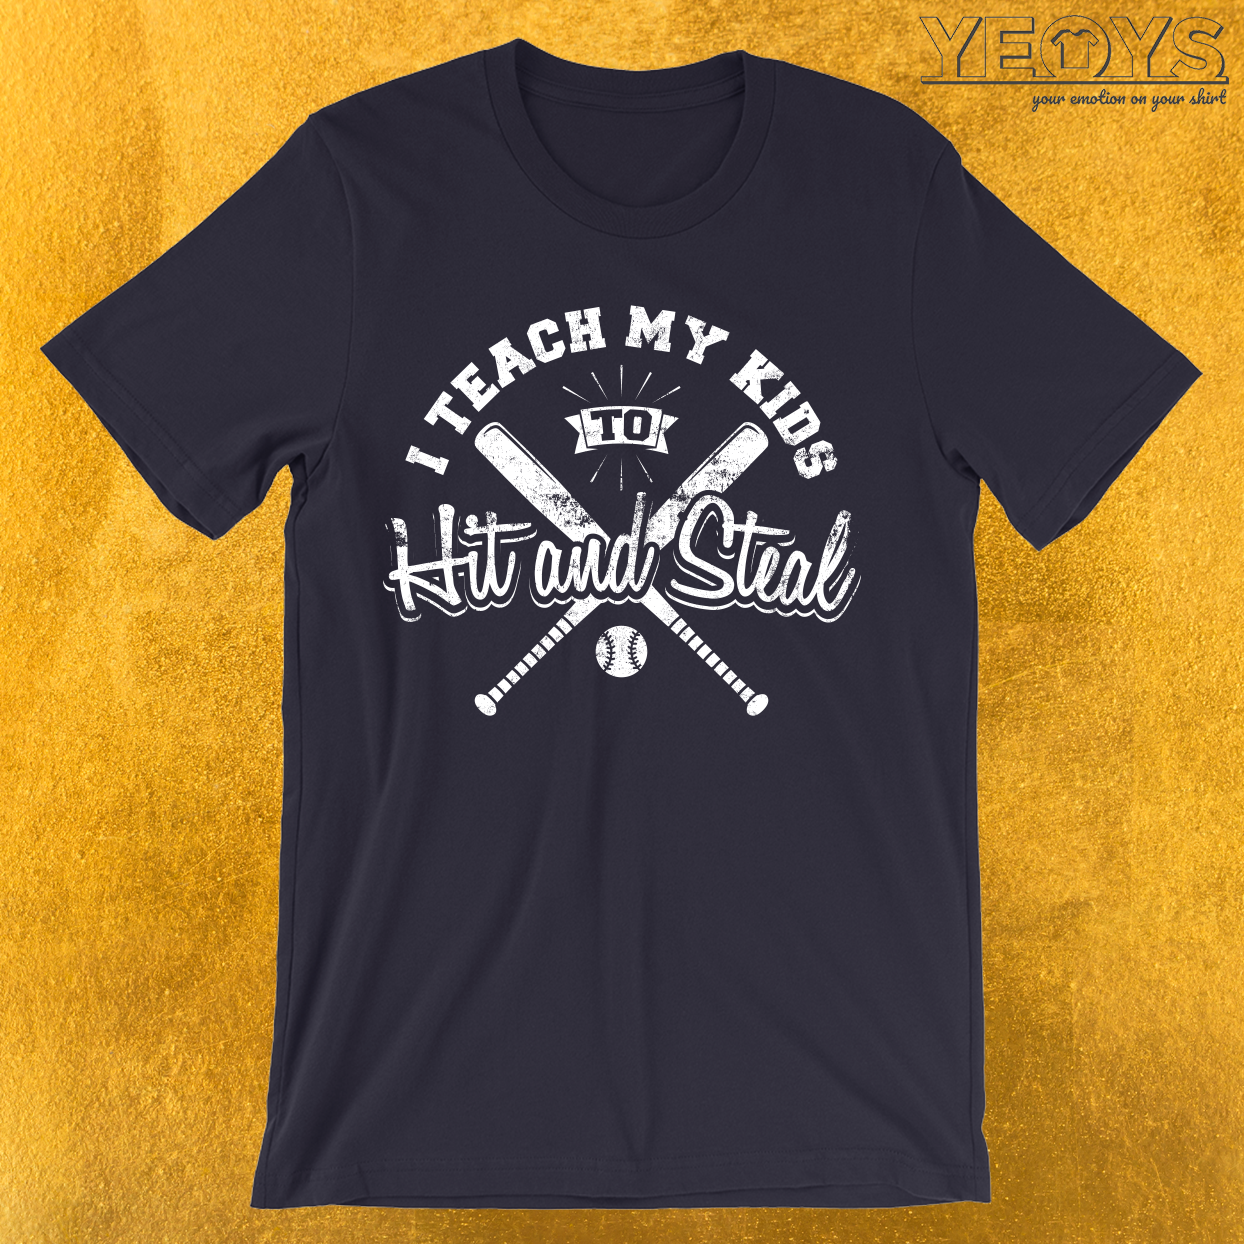 I Teach My Kids To Hit And Steal T-Shirt